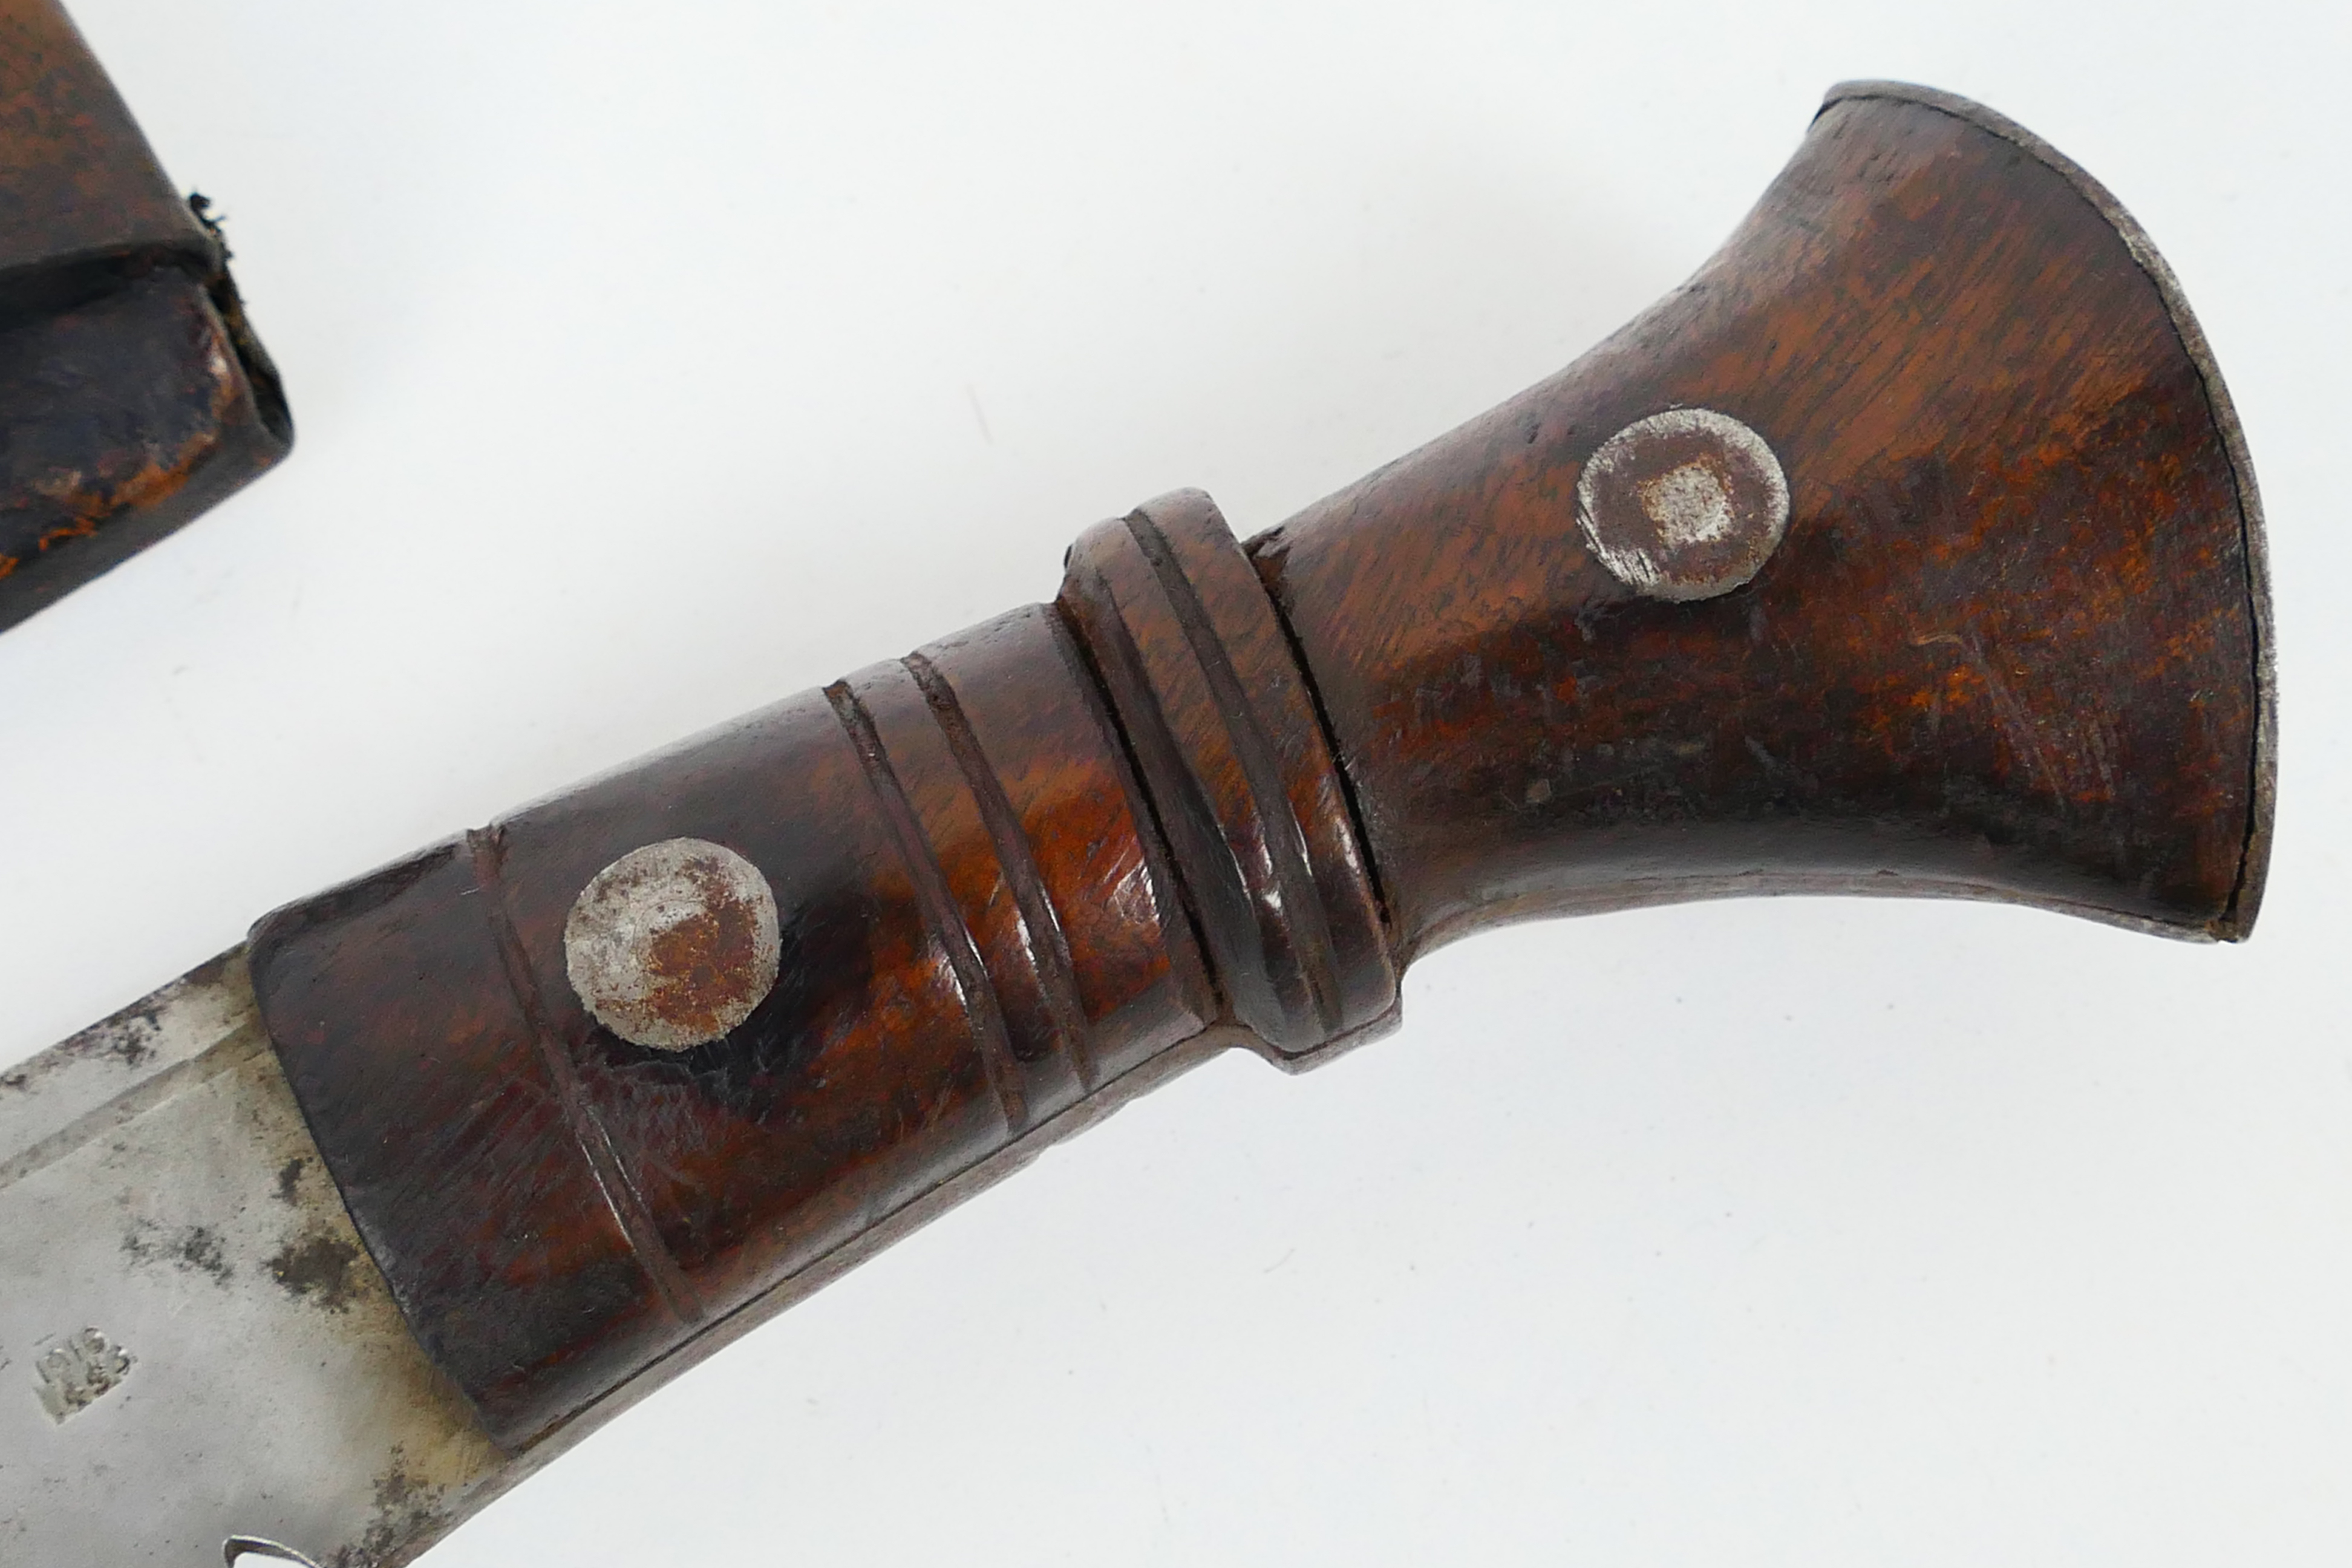 A Gurkha kukri knife, dated 1916, turned wooden hilt with metal pommel, housed in leather sheath. - Image 3 of 9